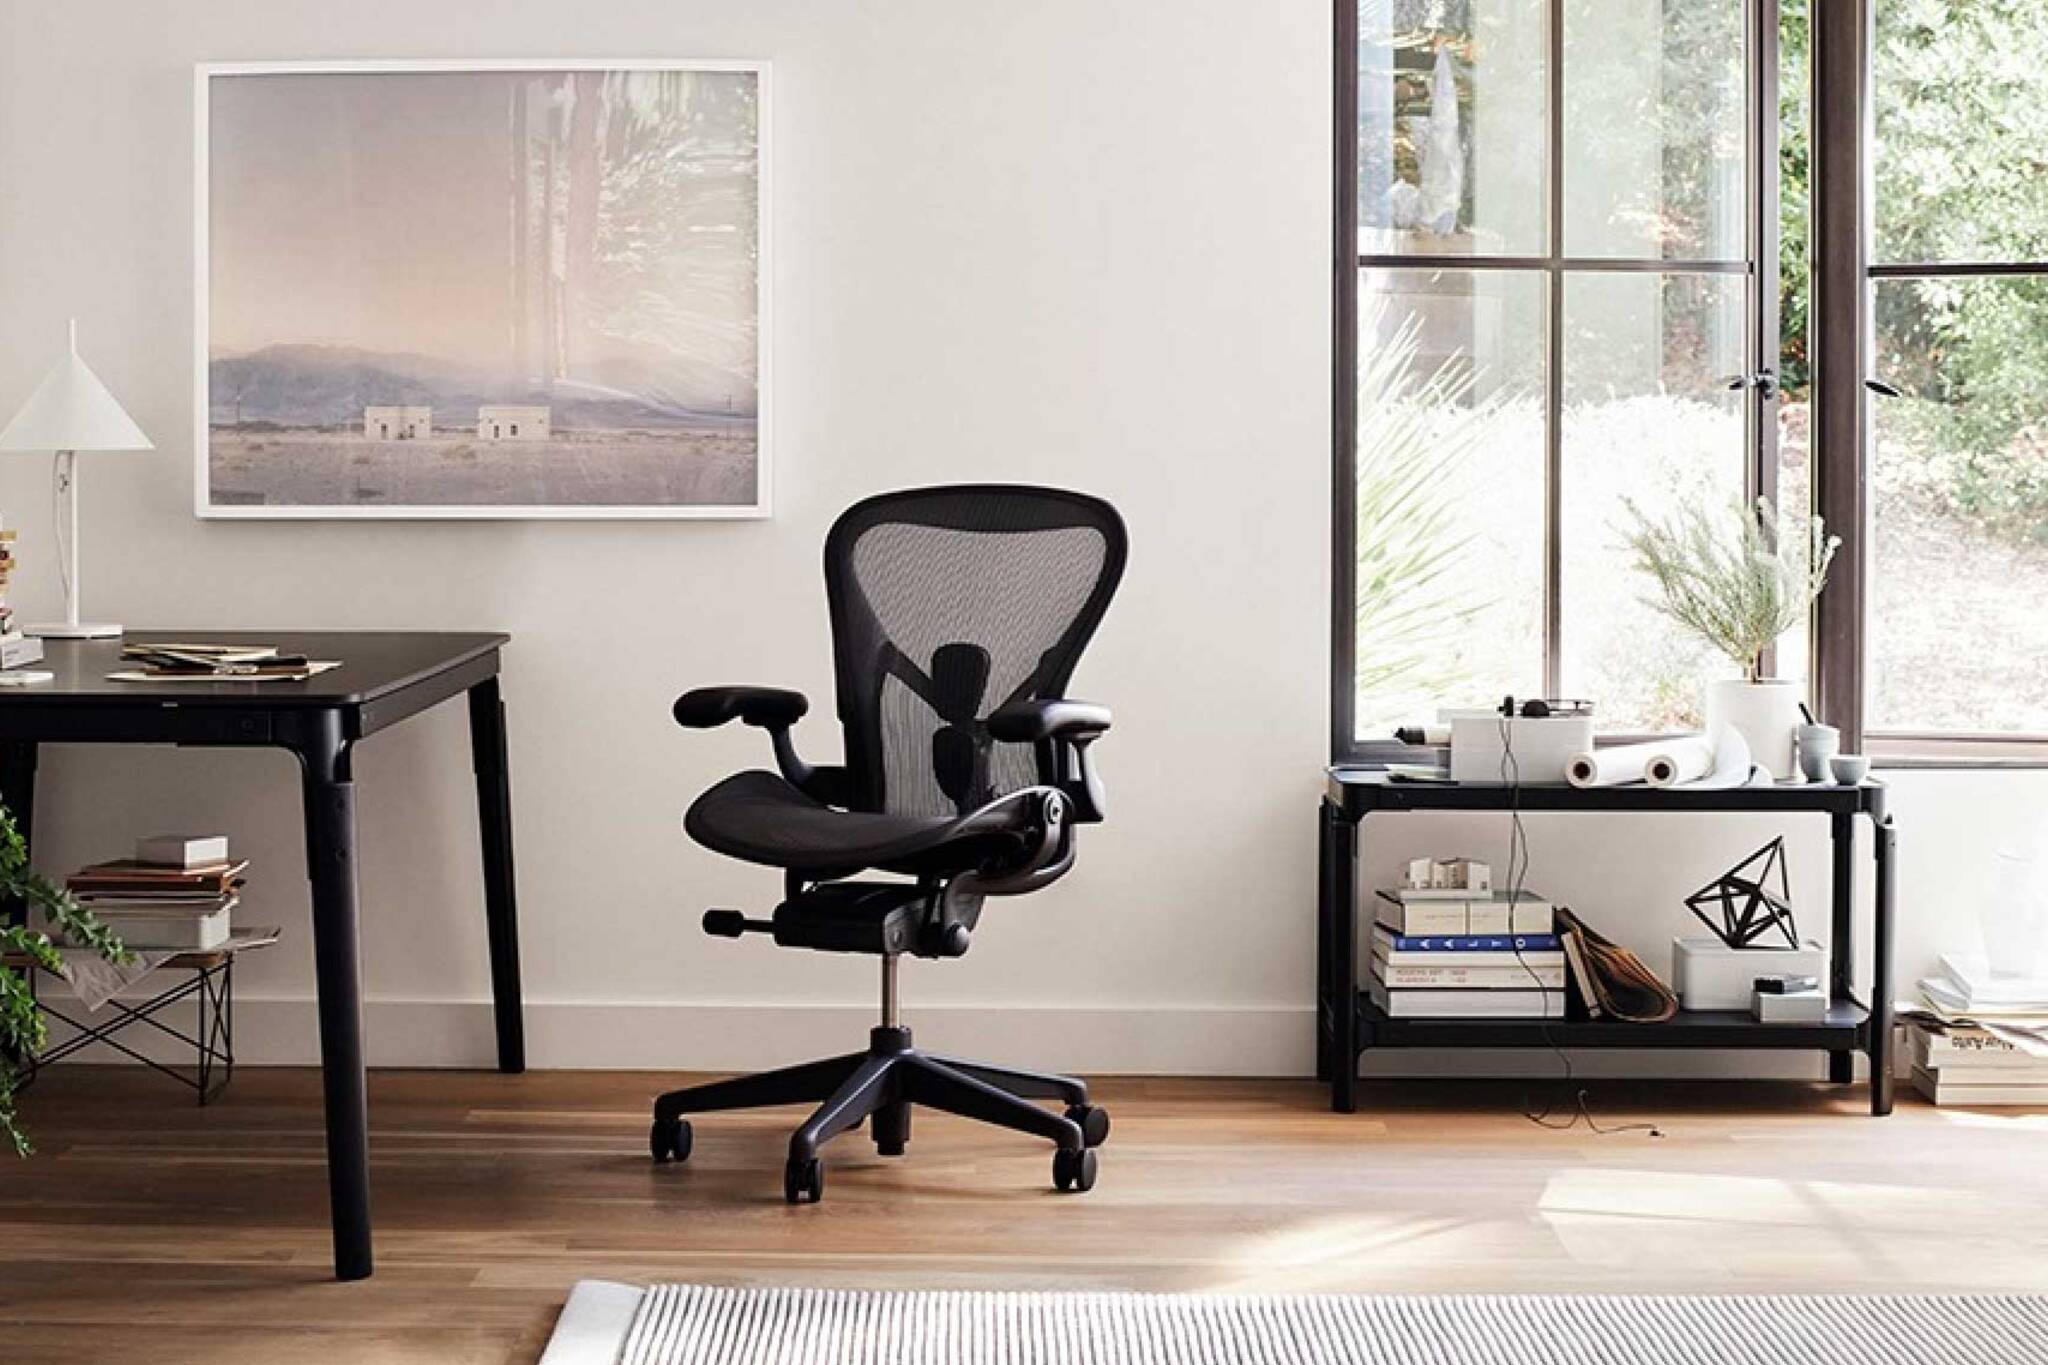 10 stores to get an ergonomic chair for your home office in Toronto